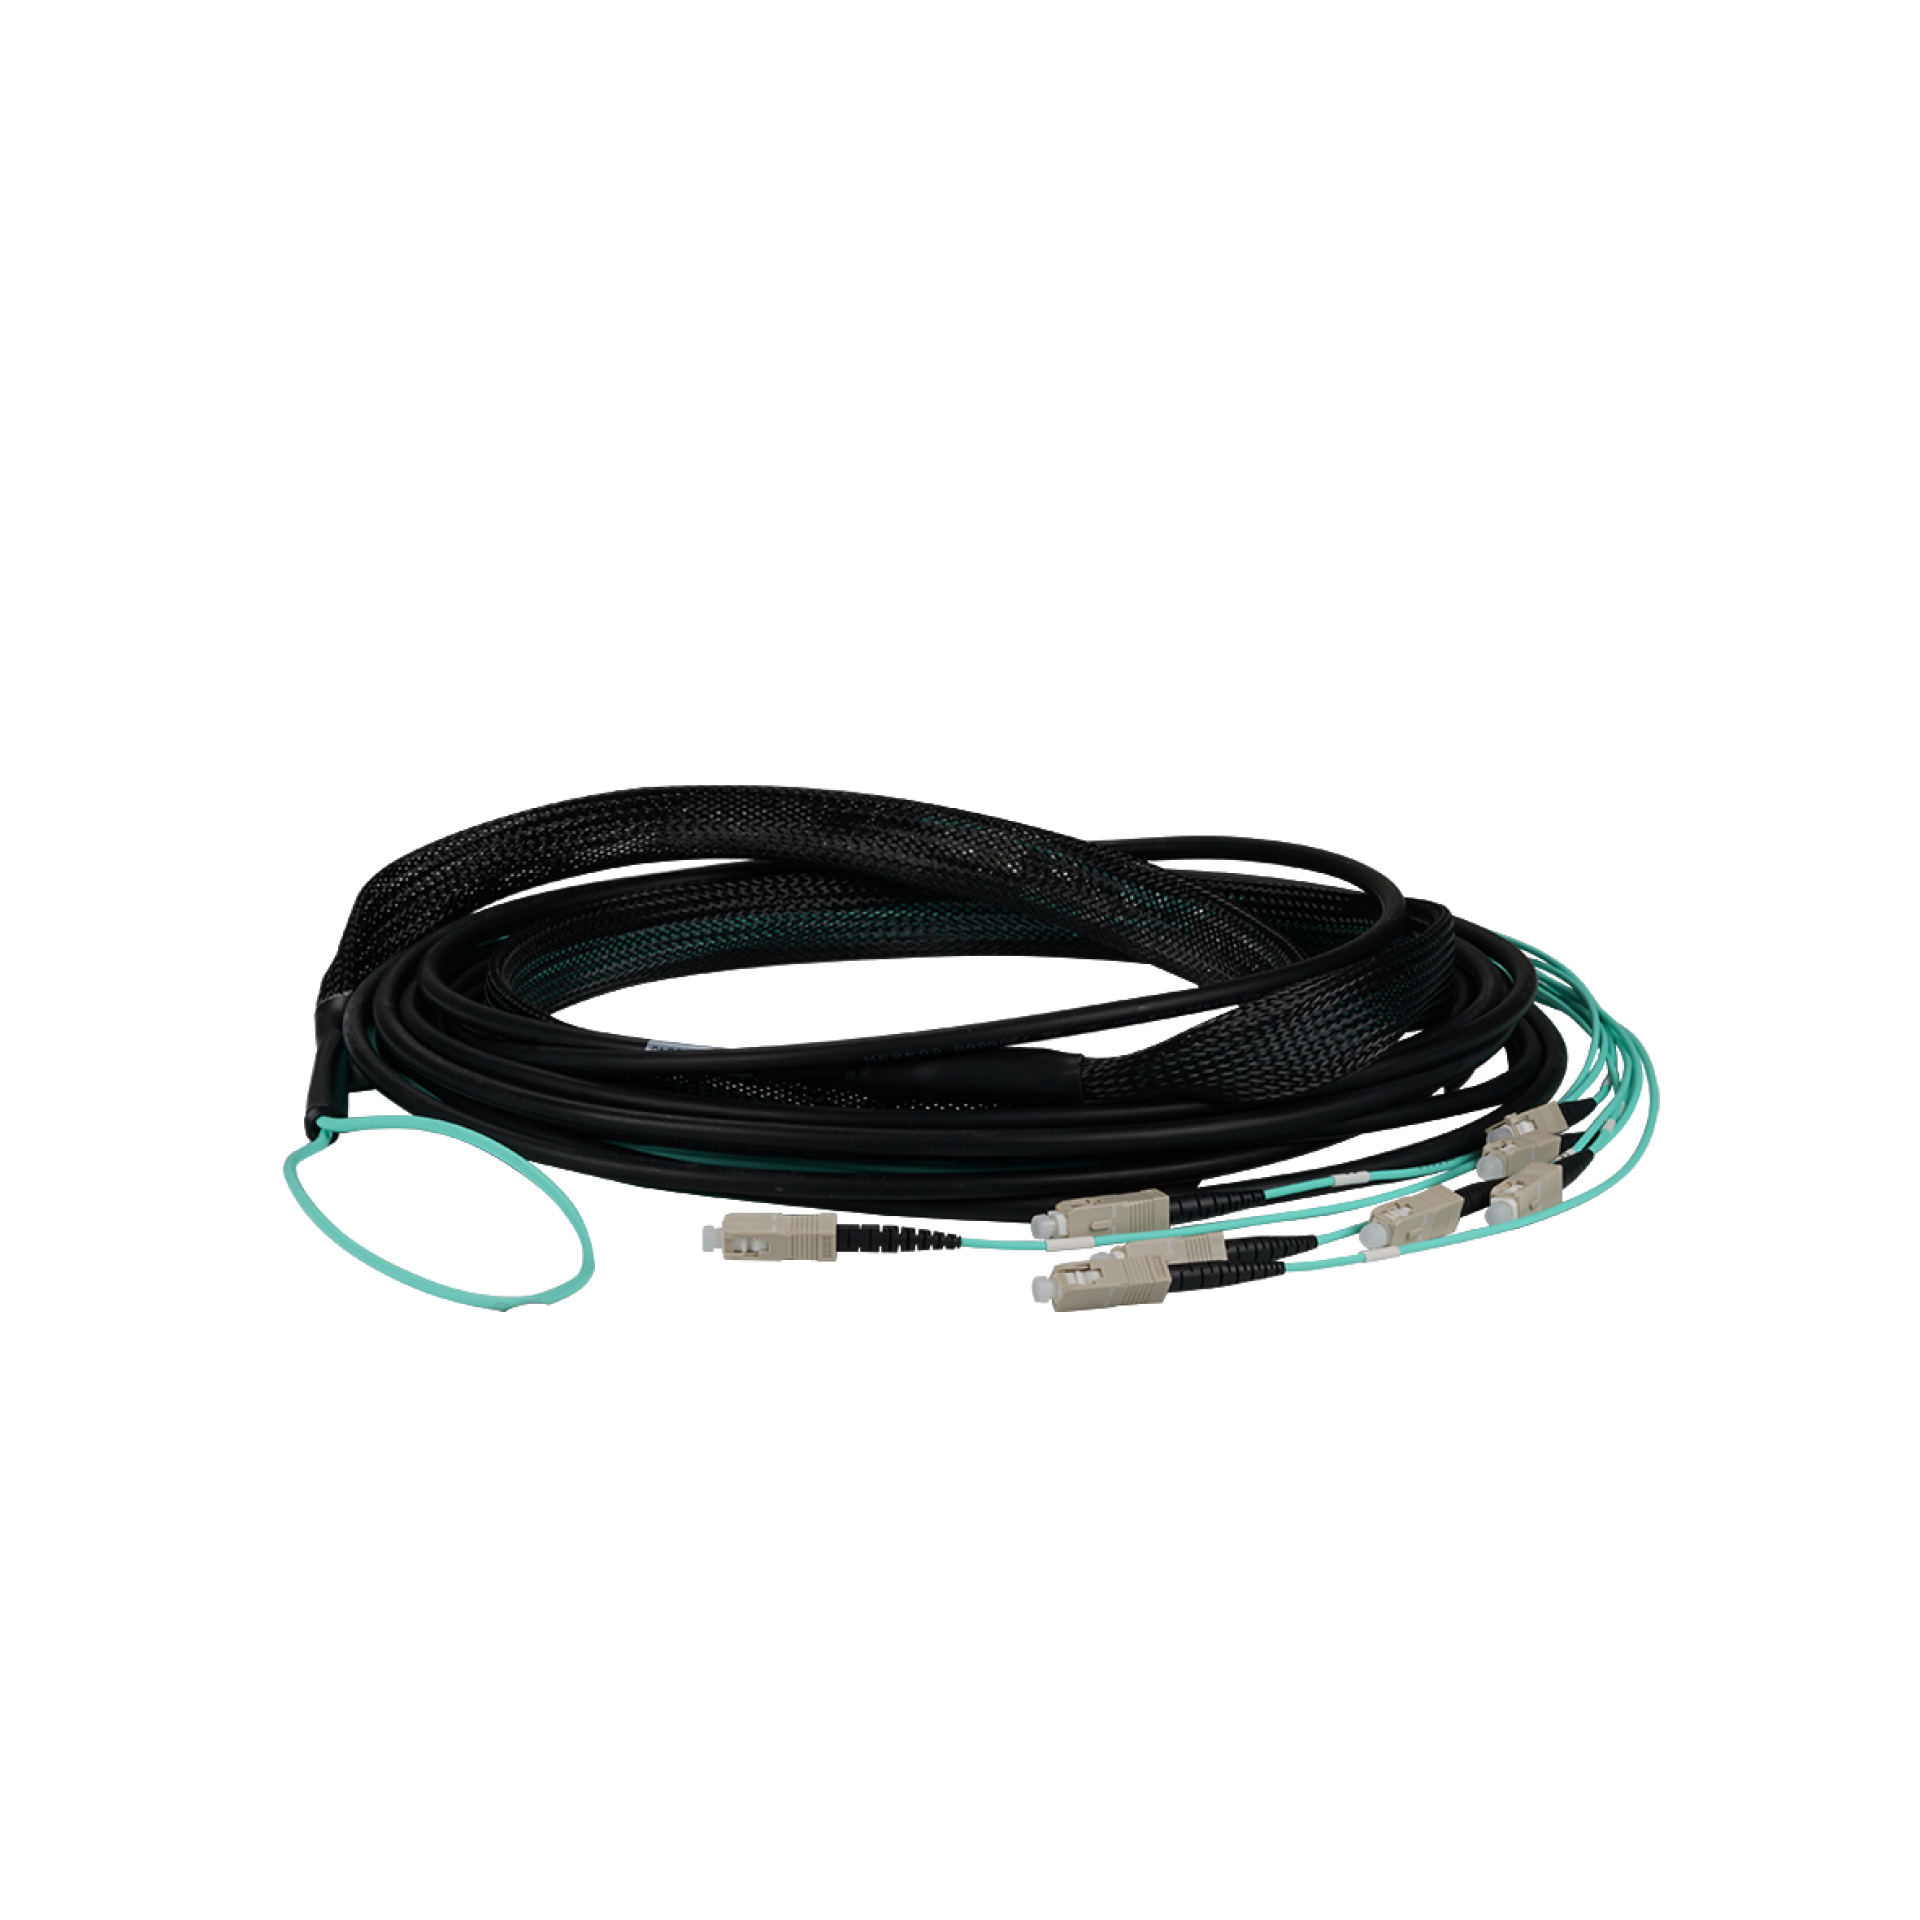 Trunk cable U-DQ(ZN)BH 8G 50/125, SC/SC OM3 60m